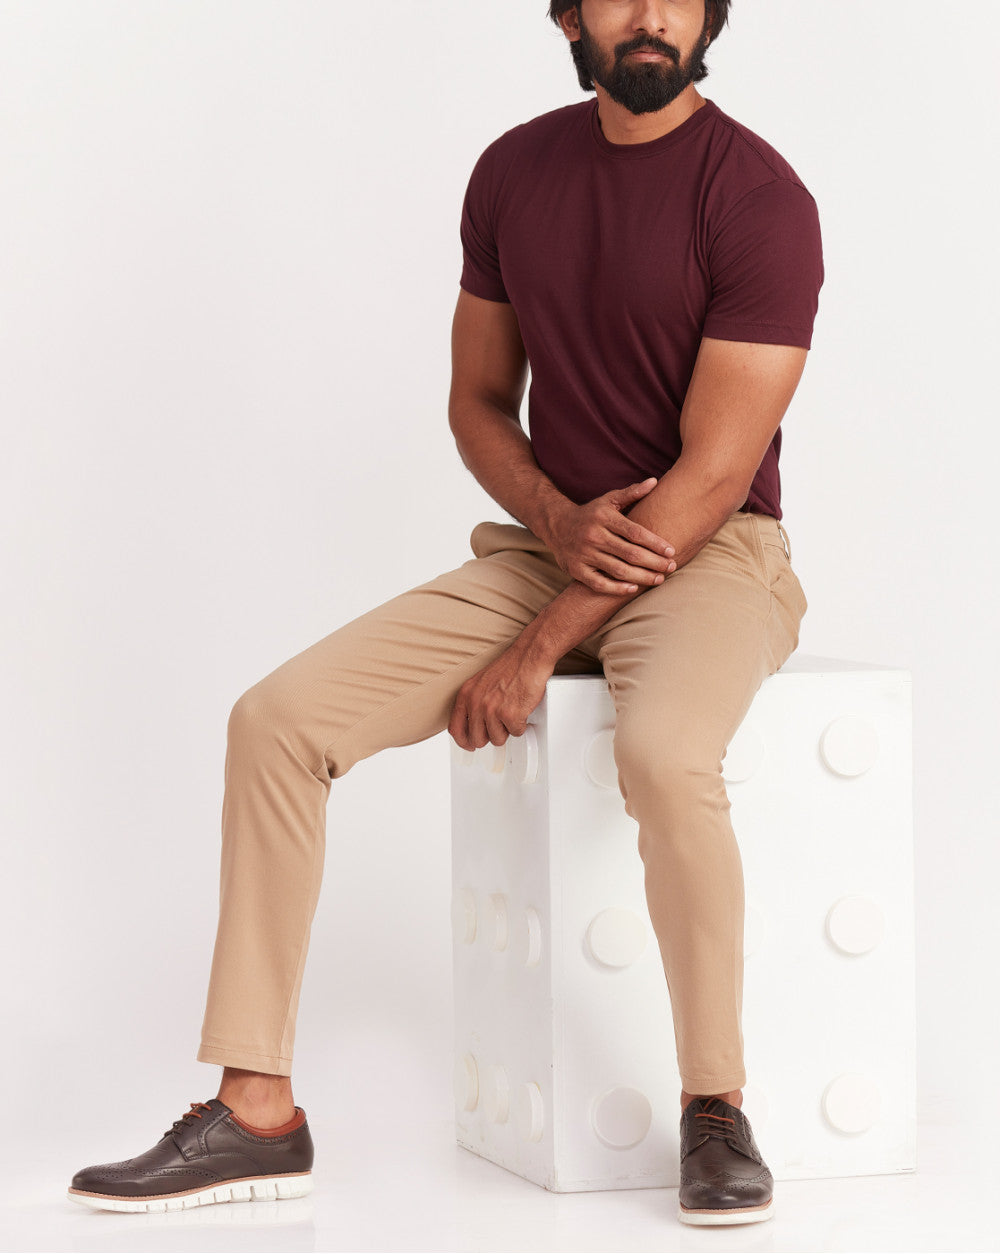 Tapered Fit Urban Chinos - Camel Brown